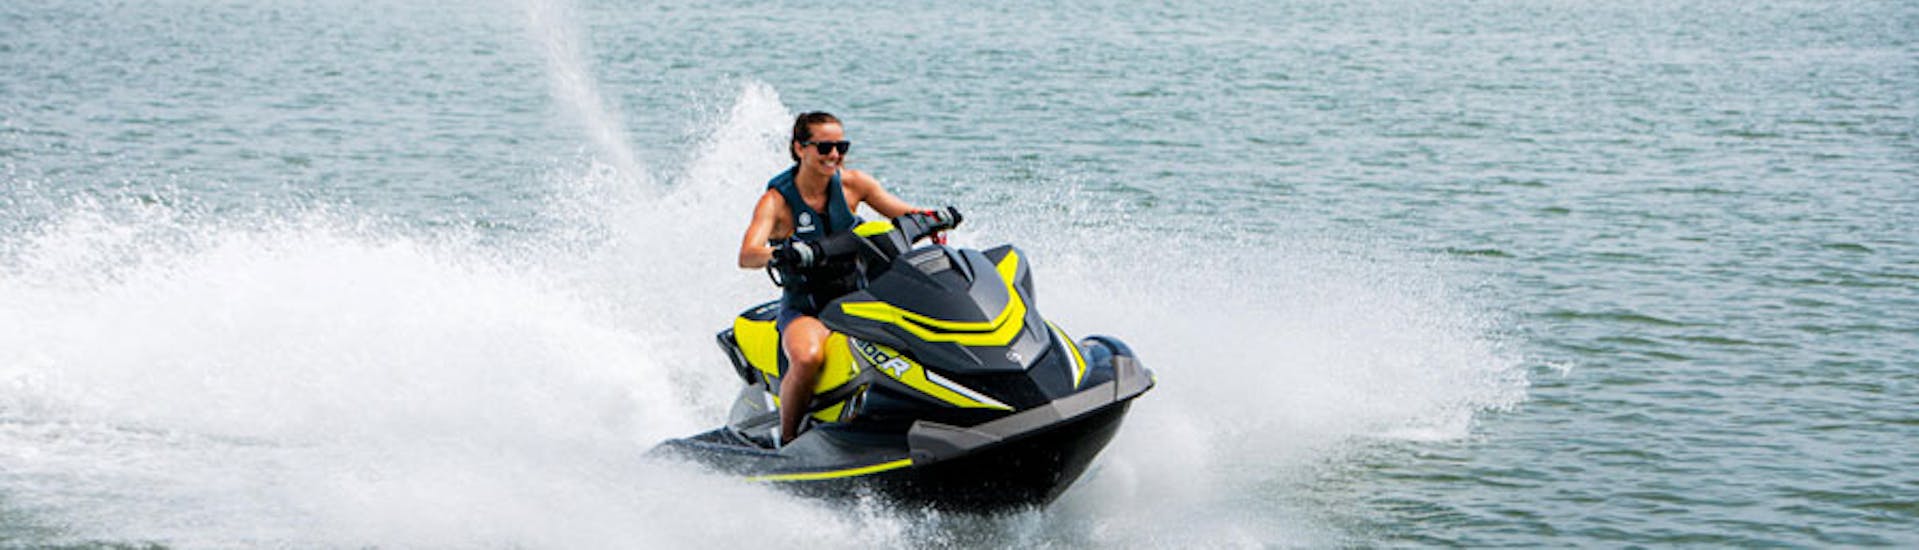 Jet Ski Rental in San Antonio in Ibiza with License with Es Vedra Charter.